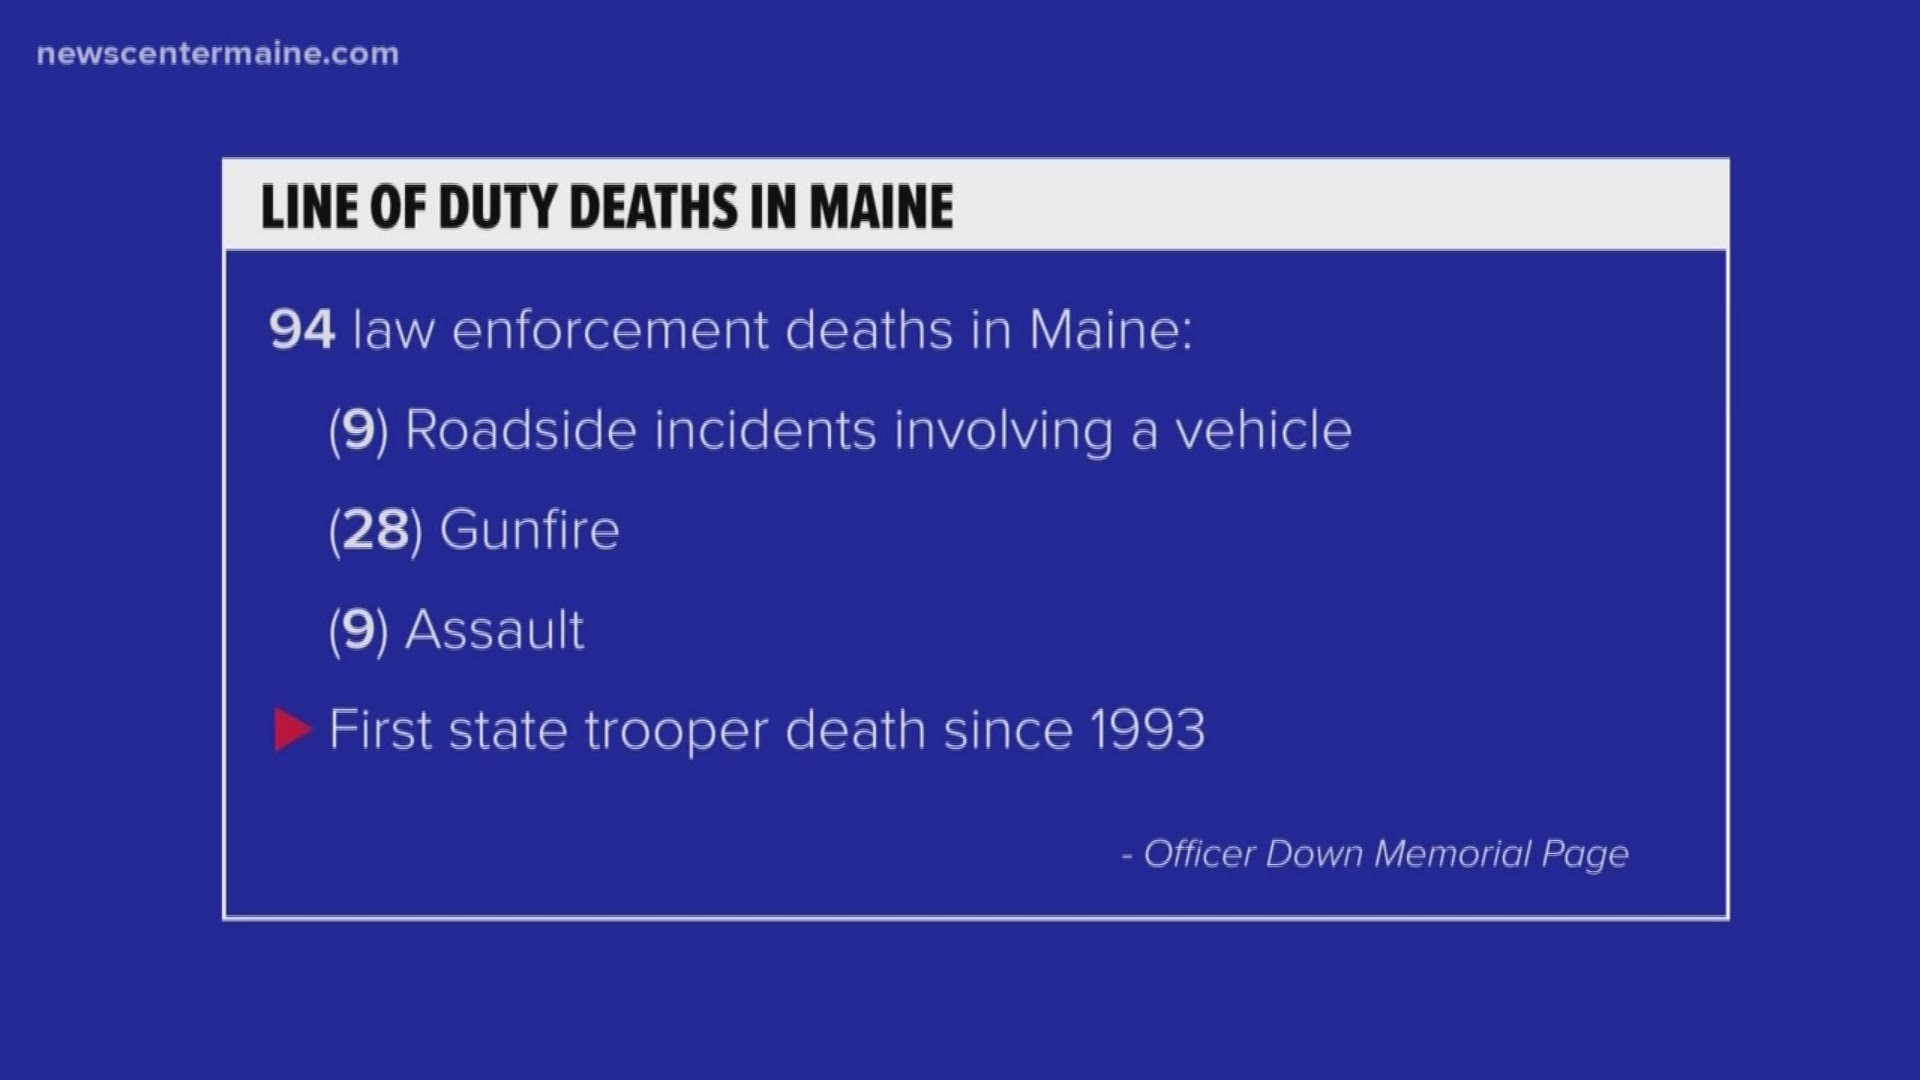 Det. Benjamin Campbell's death was the 94th line of duty death in Maine.